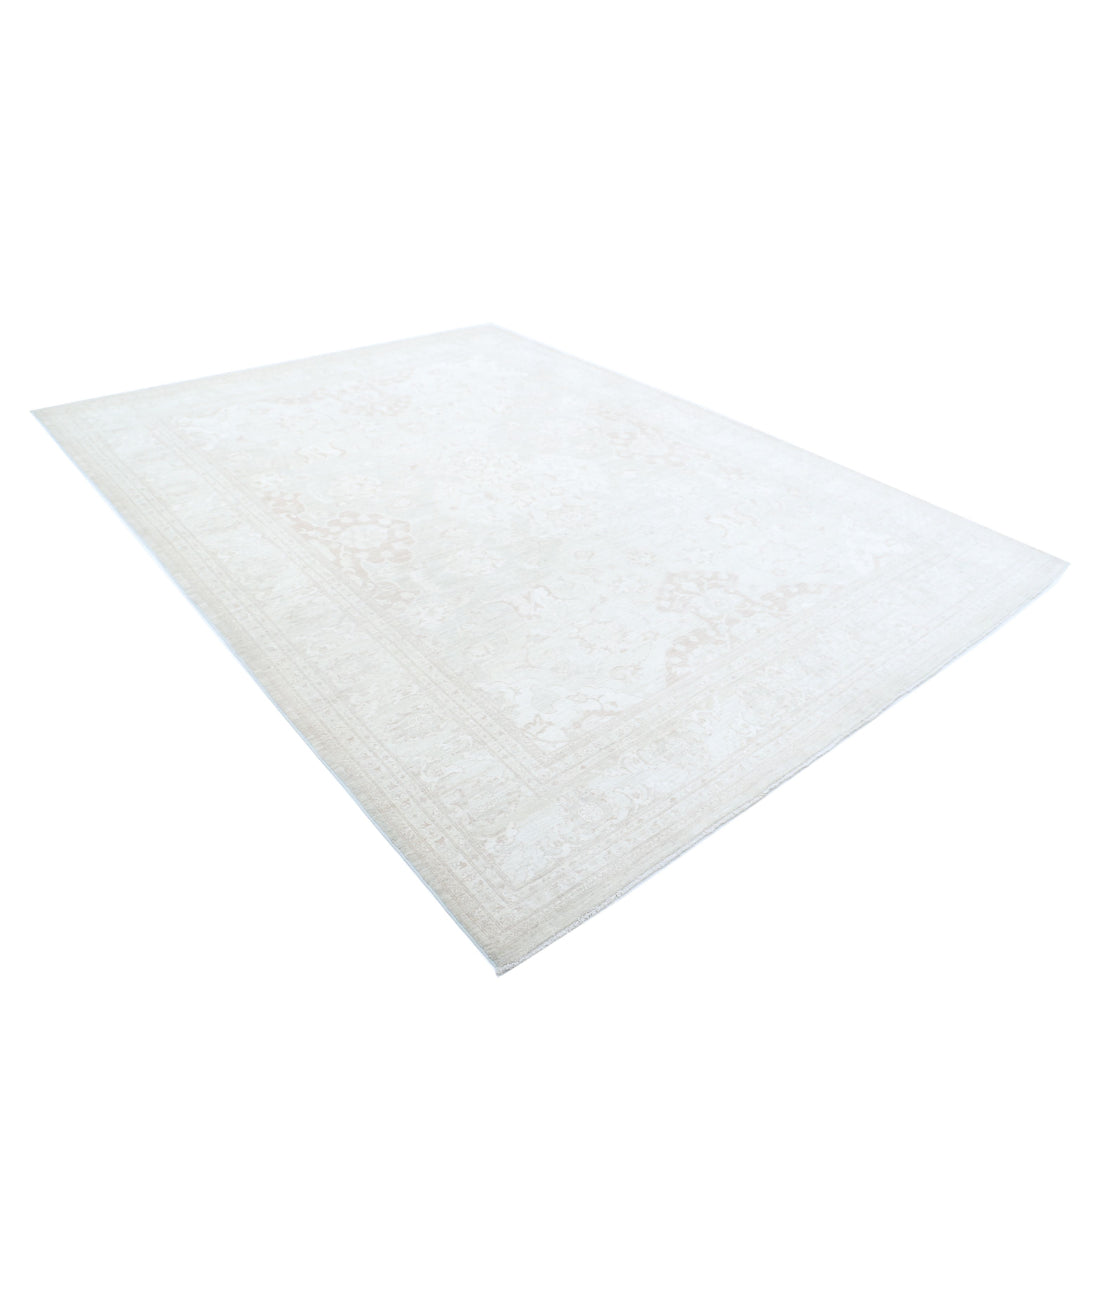 Serenity 8'10'' X 11'8'' Hand-Knotted Wool Rug 8'10'' x 11'8'' (265 X 350) / Ivory / Ivory